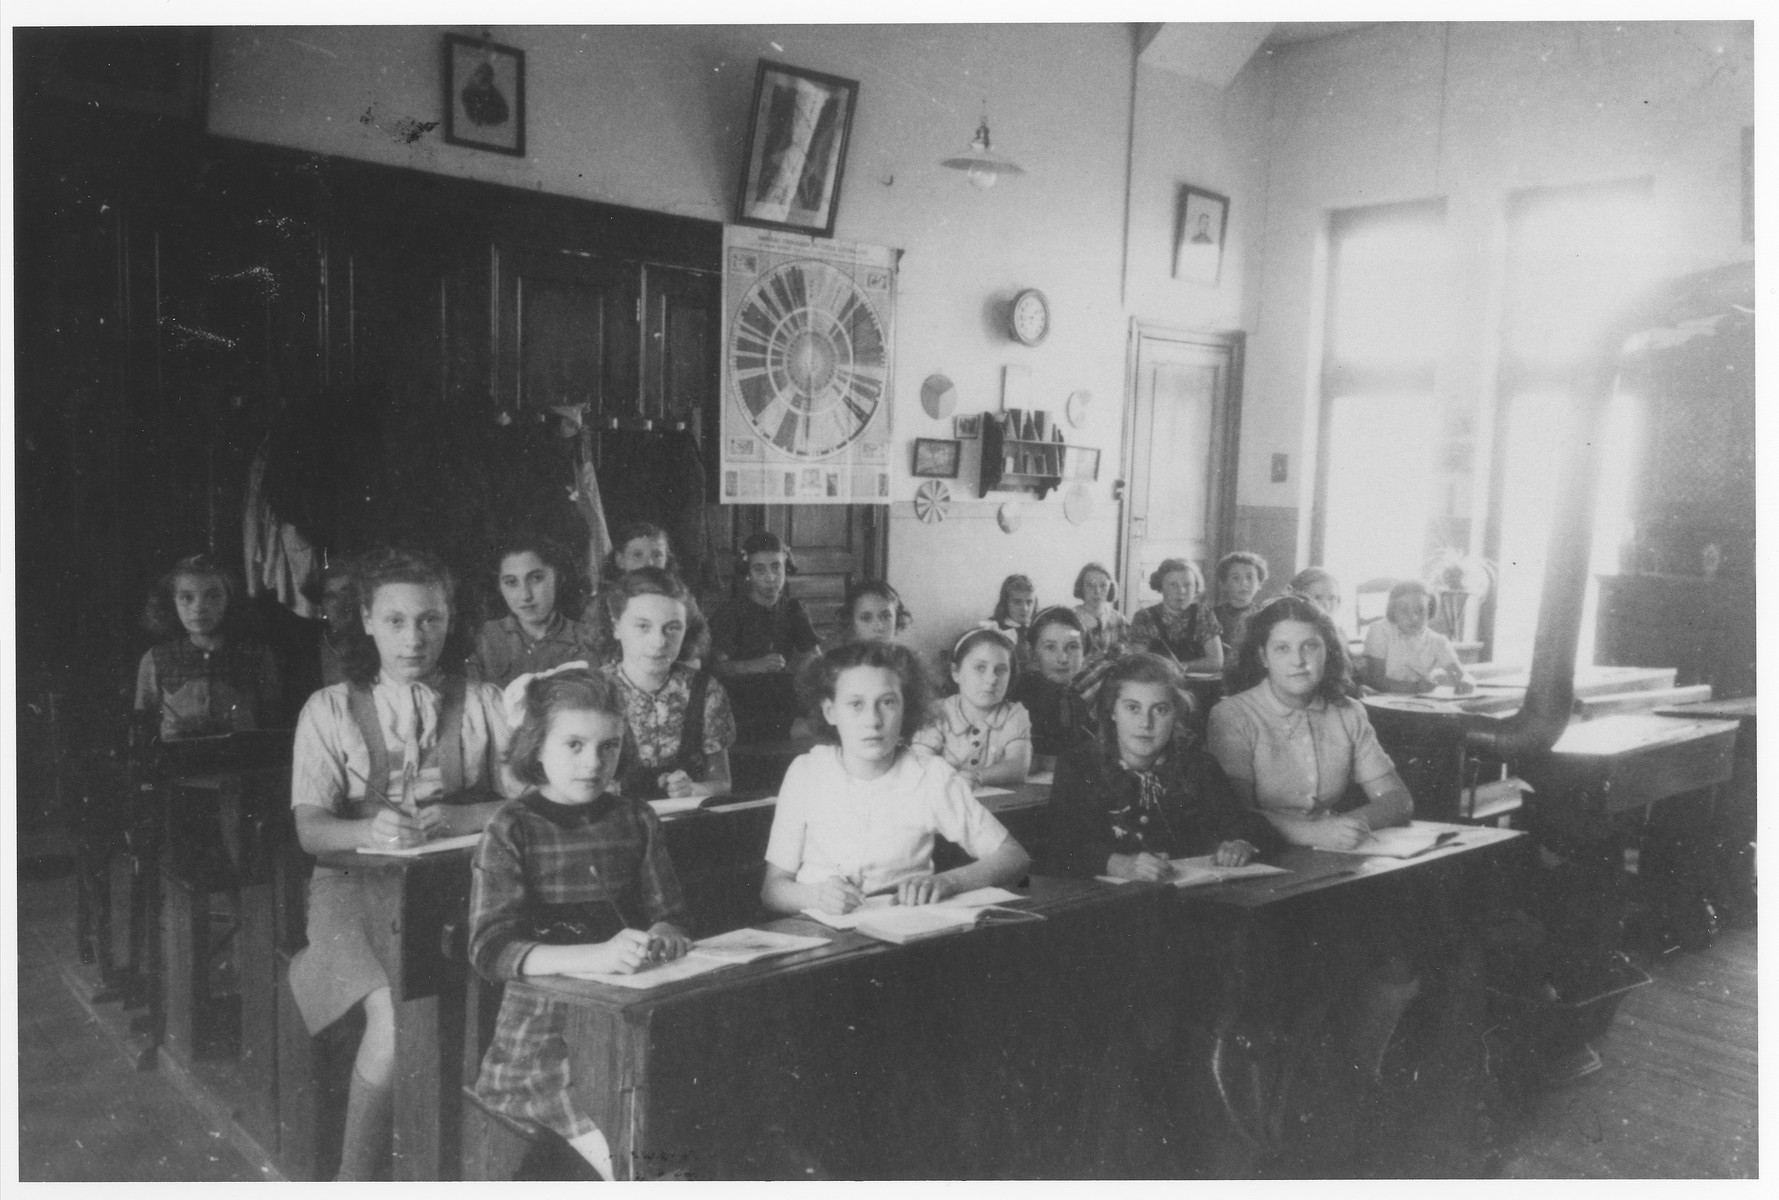 Jewish girls who are living in hiding, study alongside Catholic students at the Soeurs de Sainte Marie convent school near Braine-l'Alleud.

Ursula Klipstein is seated in the first row on the far right.